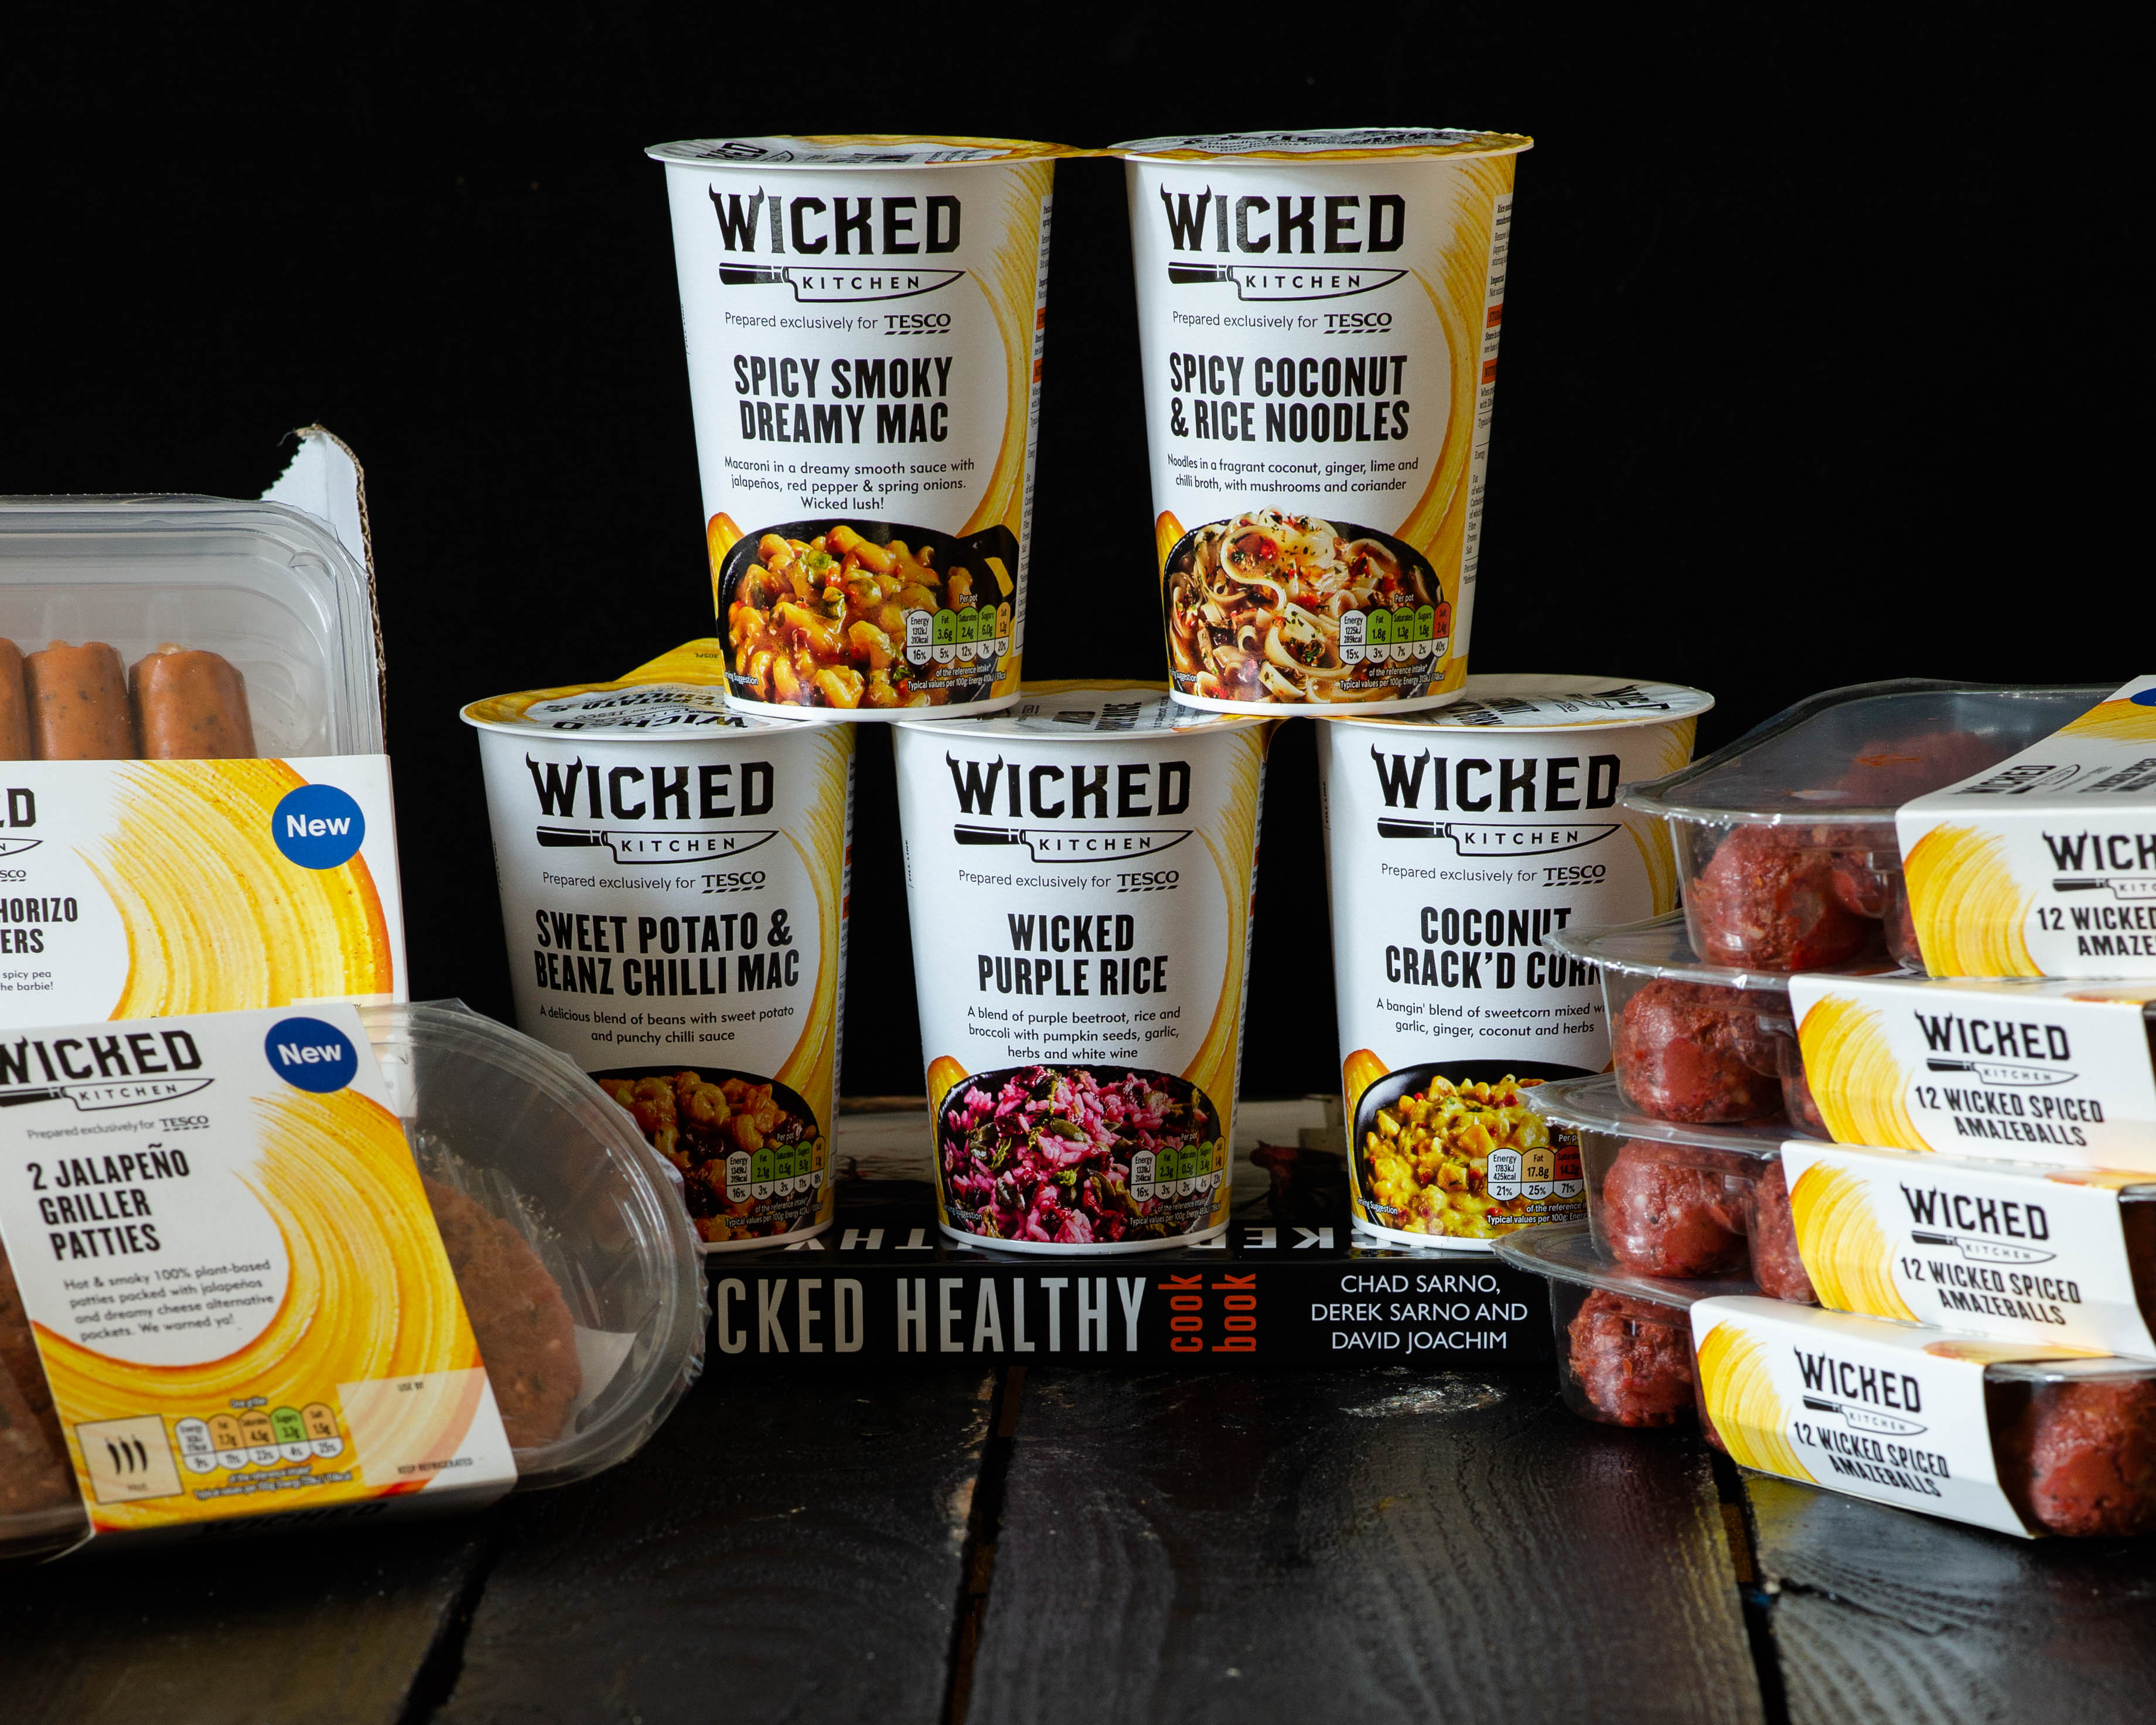 New Wicked Kitchen products